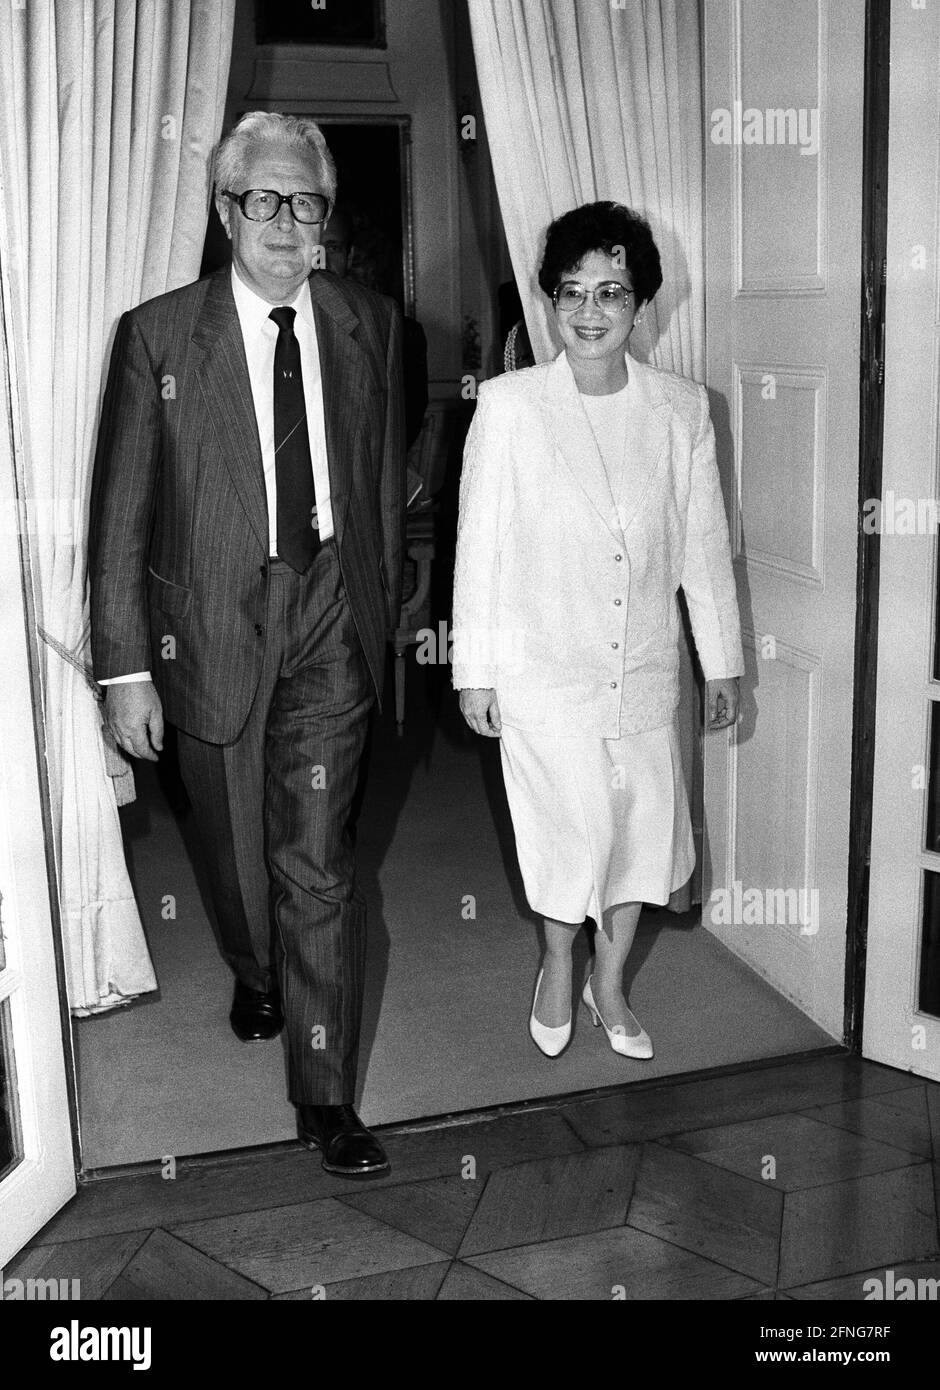 Germany, Bonn, 11.07.1989. Archive No: 07-12-26 State visit of the President of the Philippines Photo: SPD Federal Chairman Hans-Jochen Vogel and President Corazon Aquino [automated translation] Stock Photo